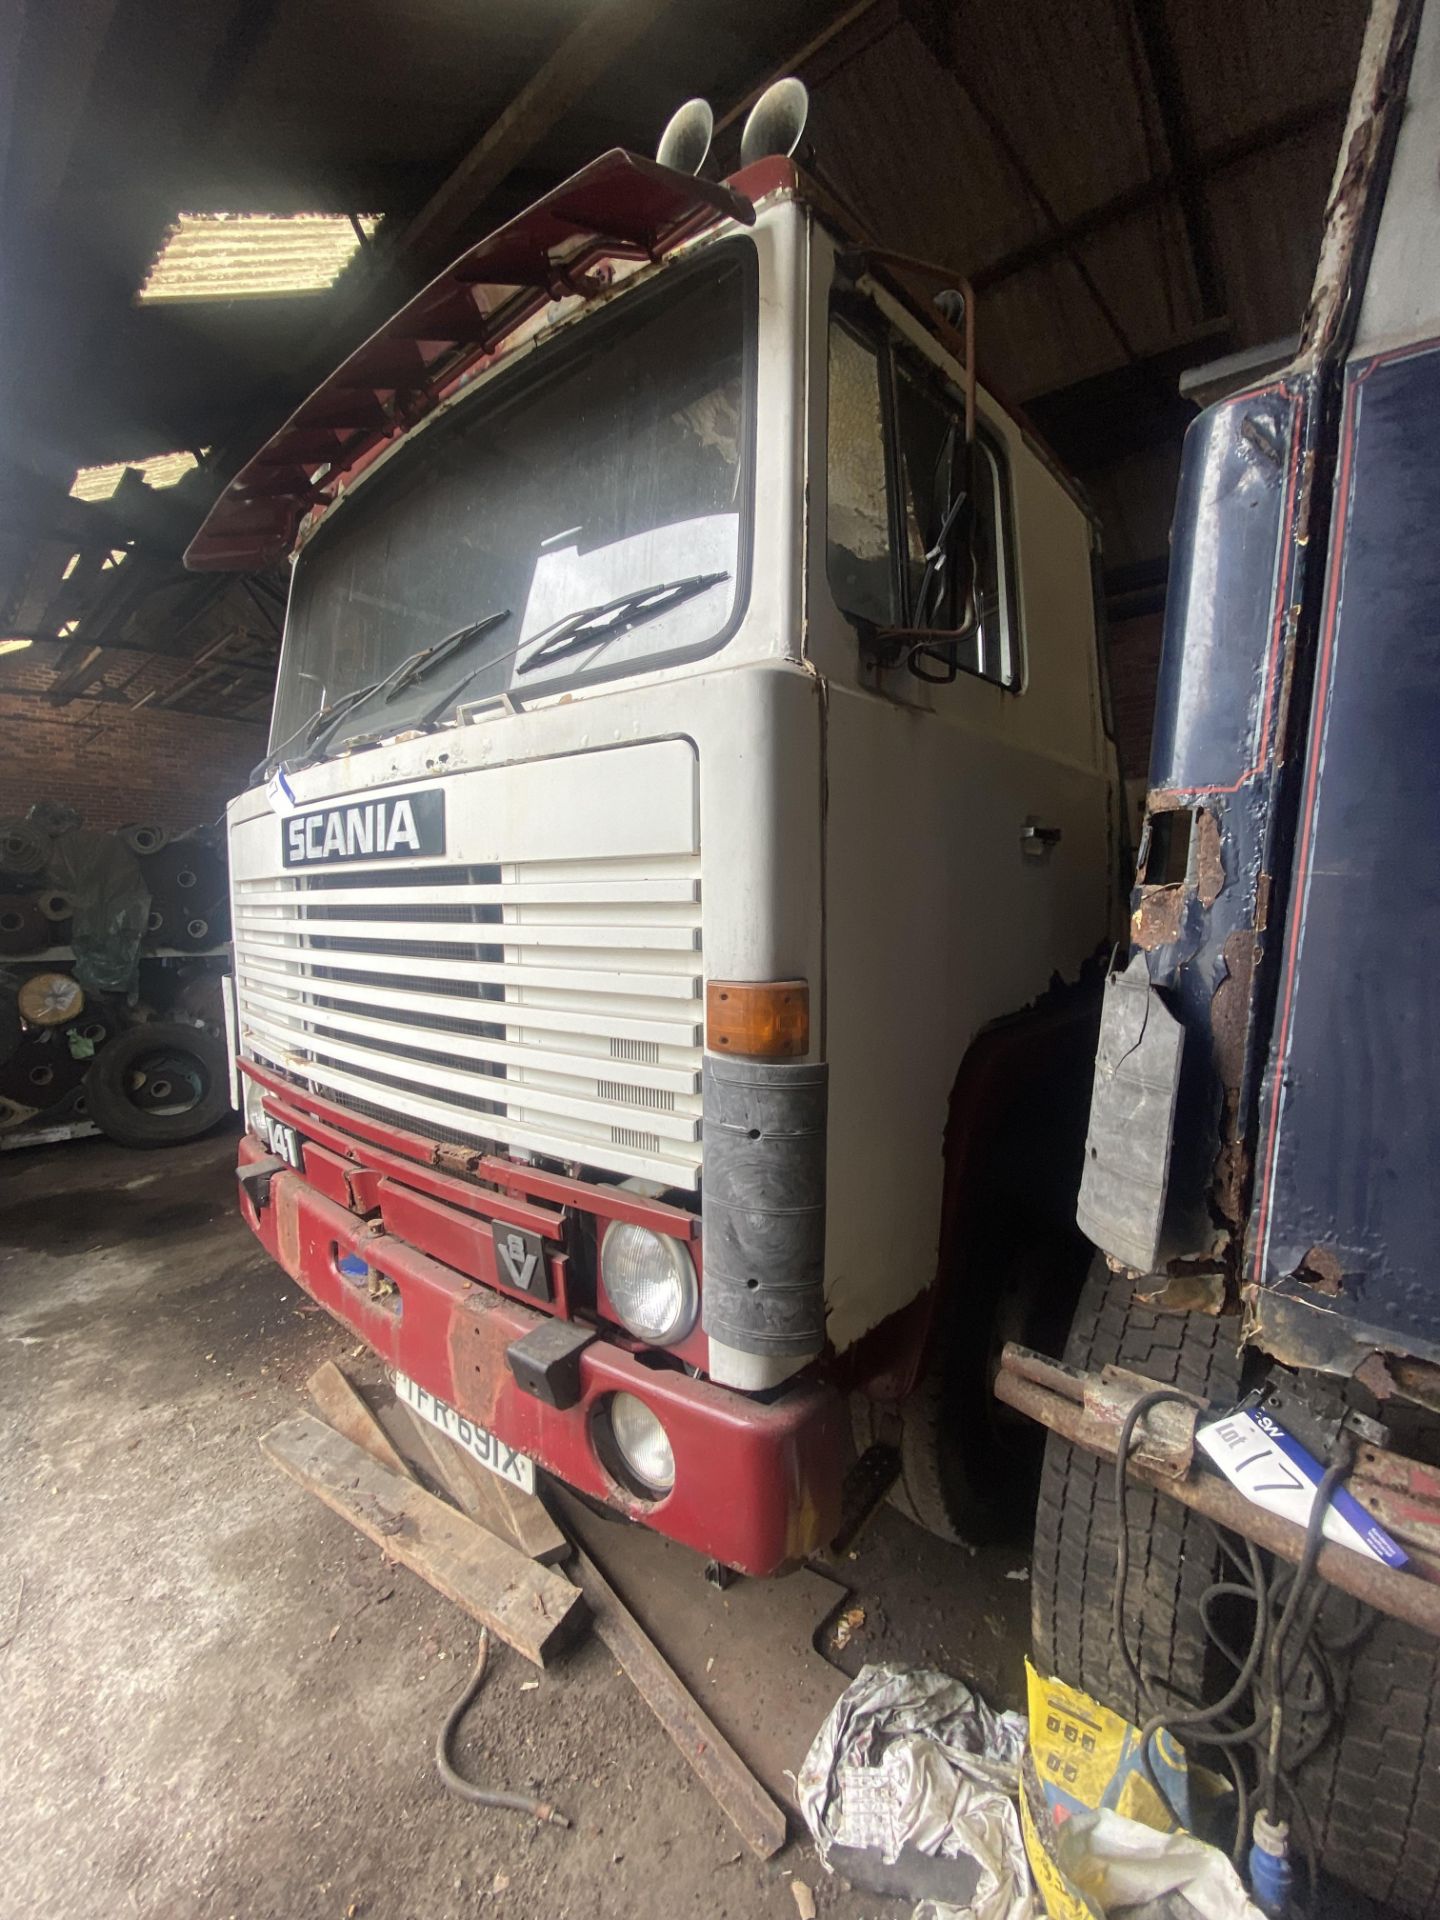 Scania 141 V8 4X2 TRACTOR UNIT, registration no. TFR 691X, date first registered 01/06/1982, cab - Image 2 of 12